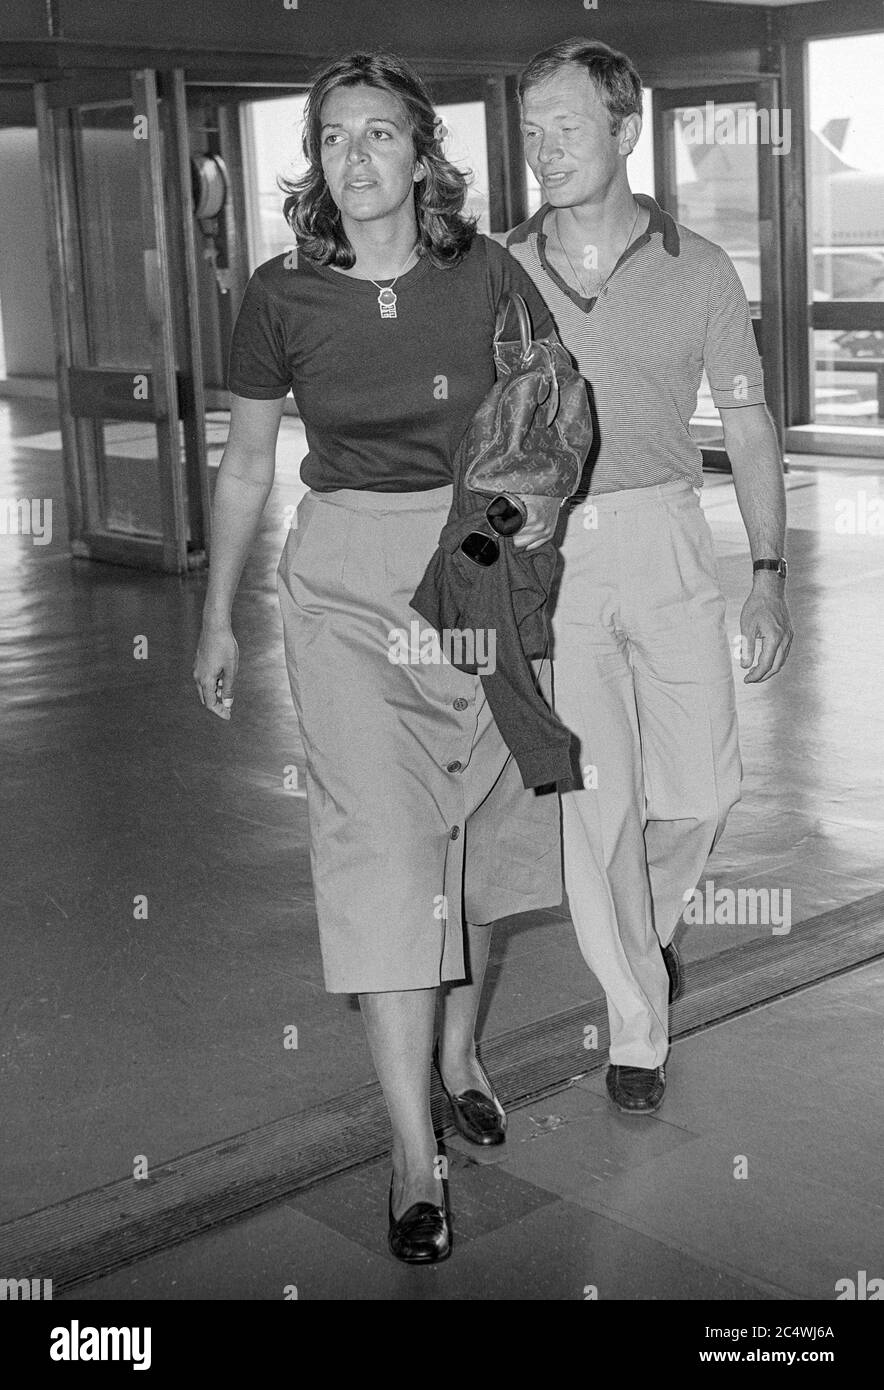 Greek socialite and business woman and heiress to the Onassis fortune Christina Onassis leaving London's Heathrow Airport with husband Sergei Kauzov in September 1979. Stock Photo